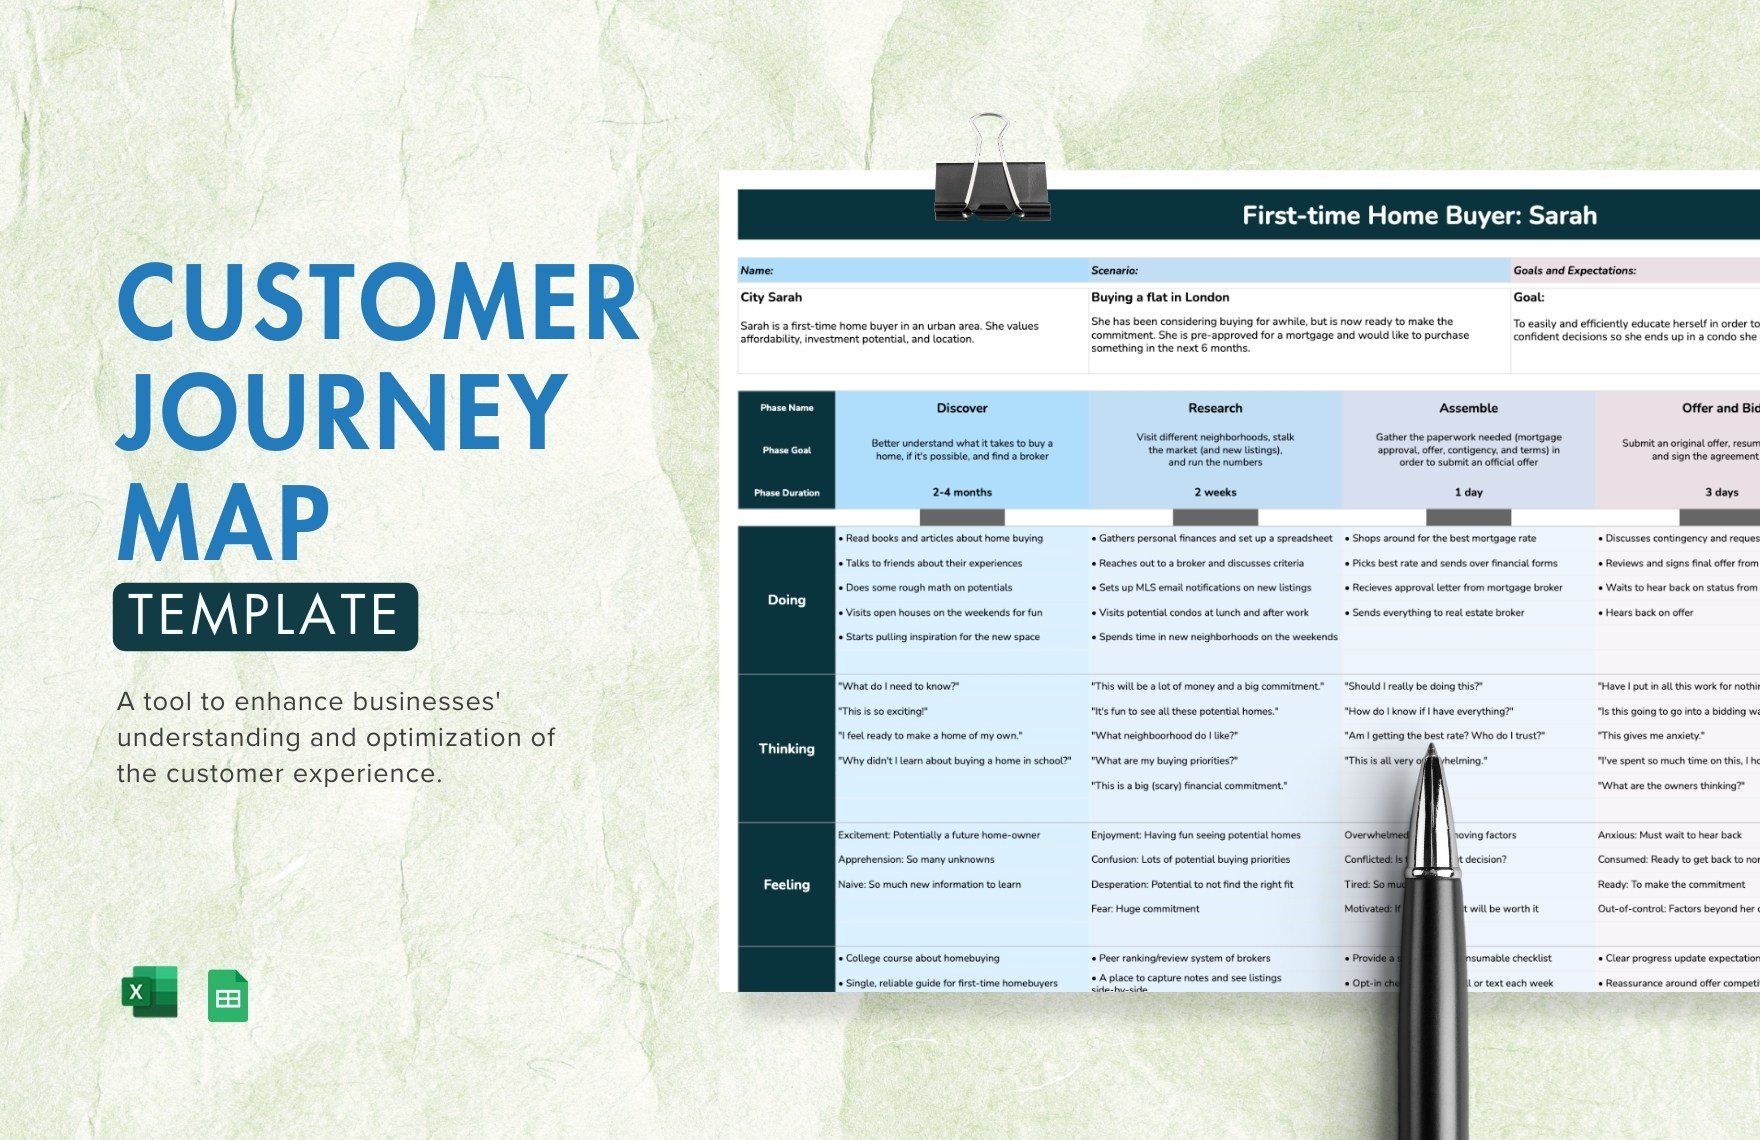 Customer Journey Map Template in Excel, Google Sheets